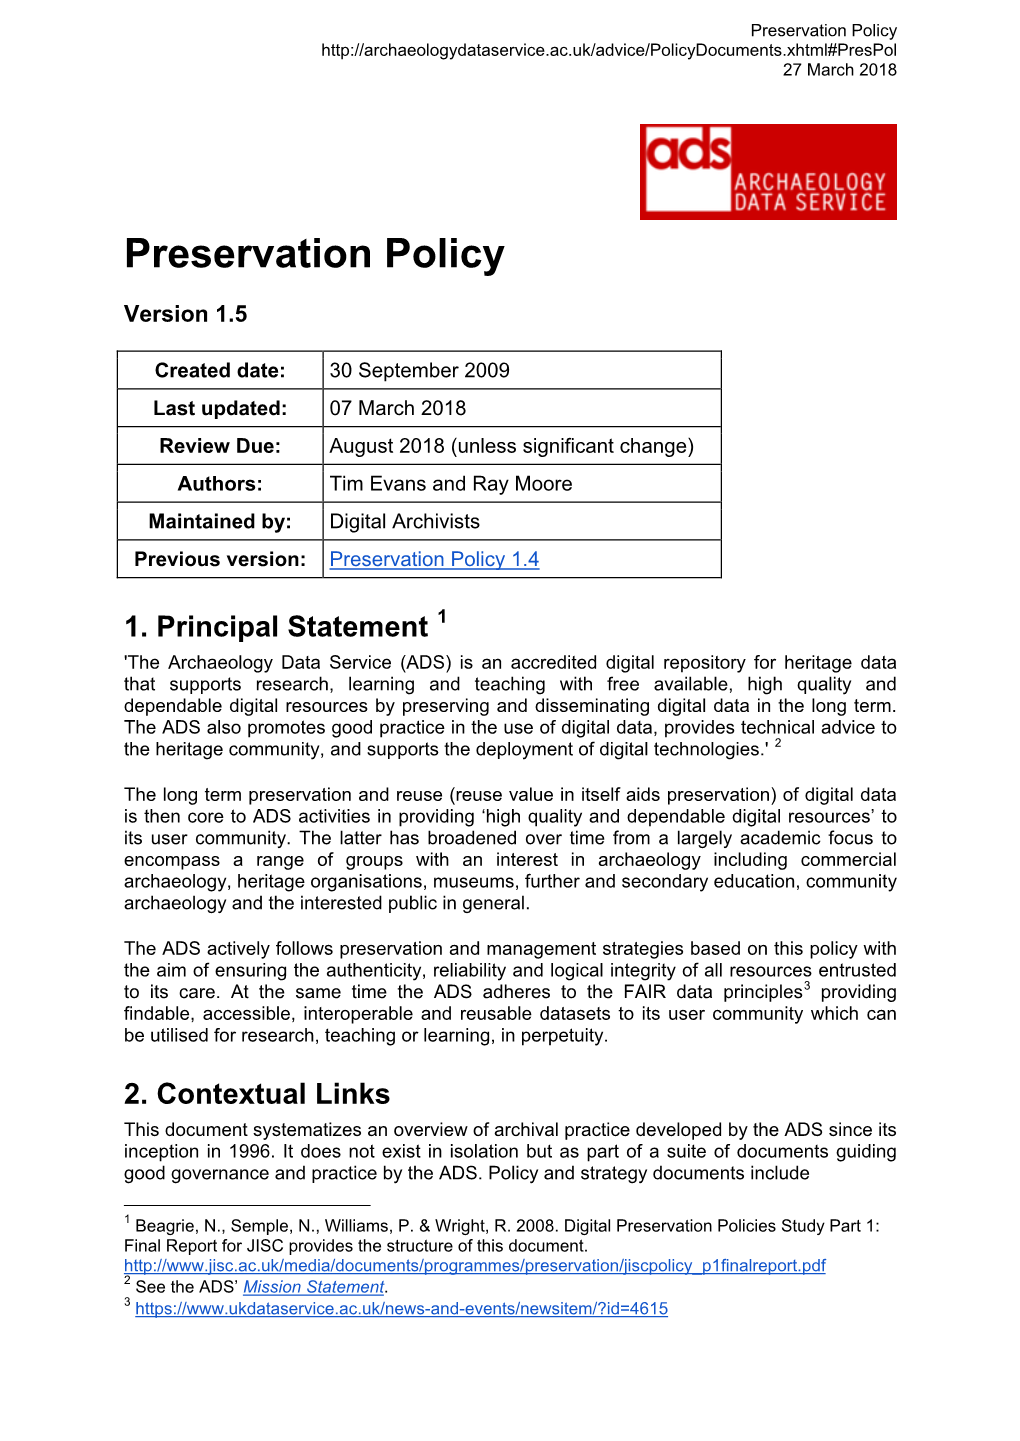 Preservation Policy 27 March 2018